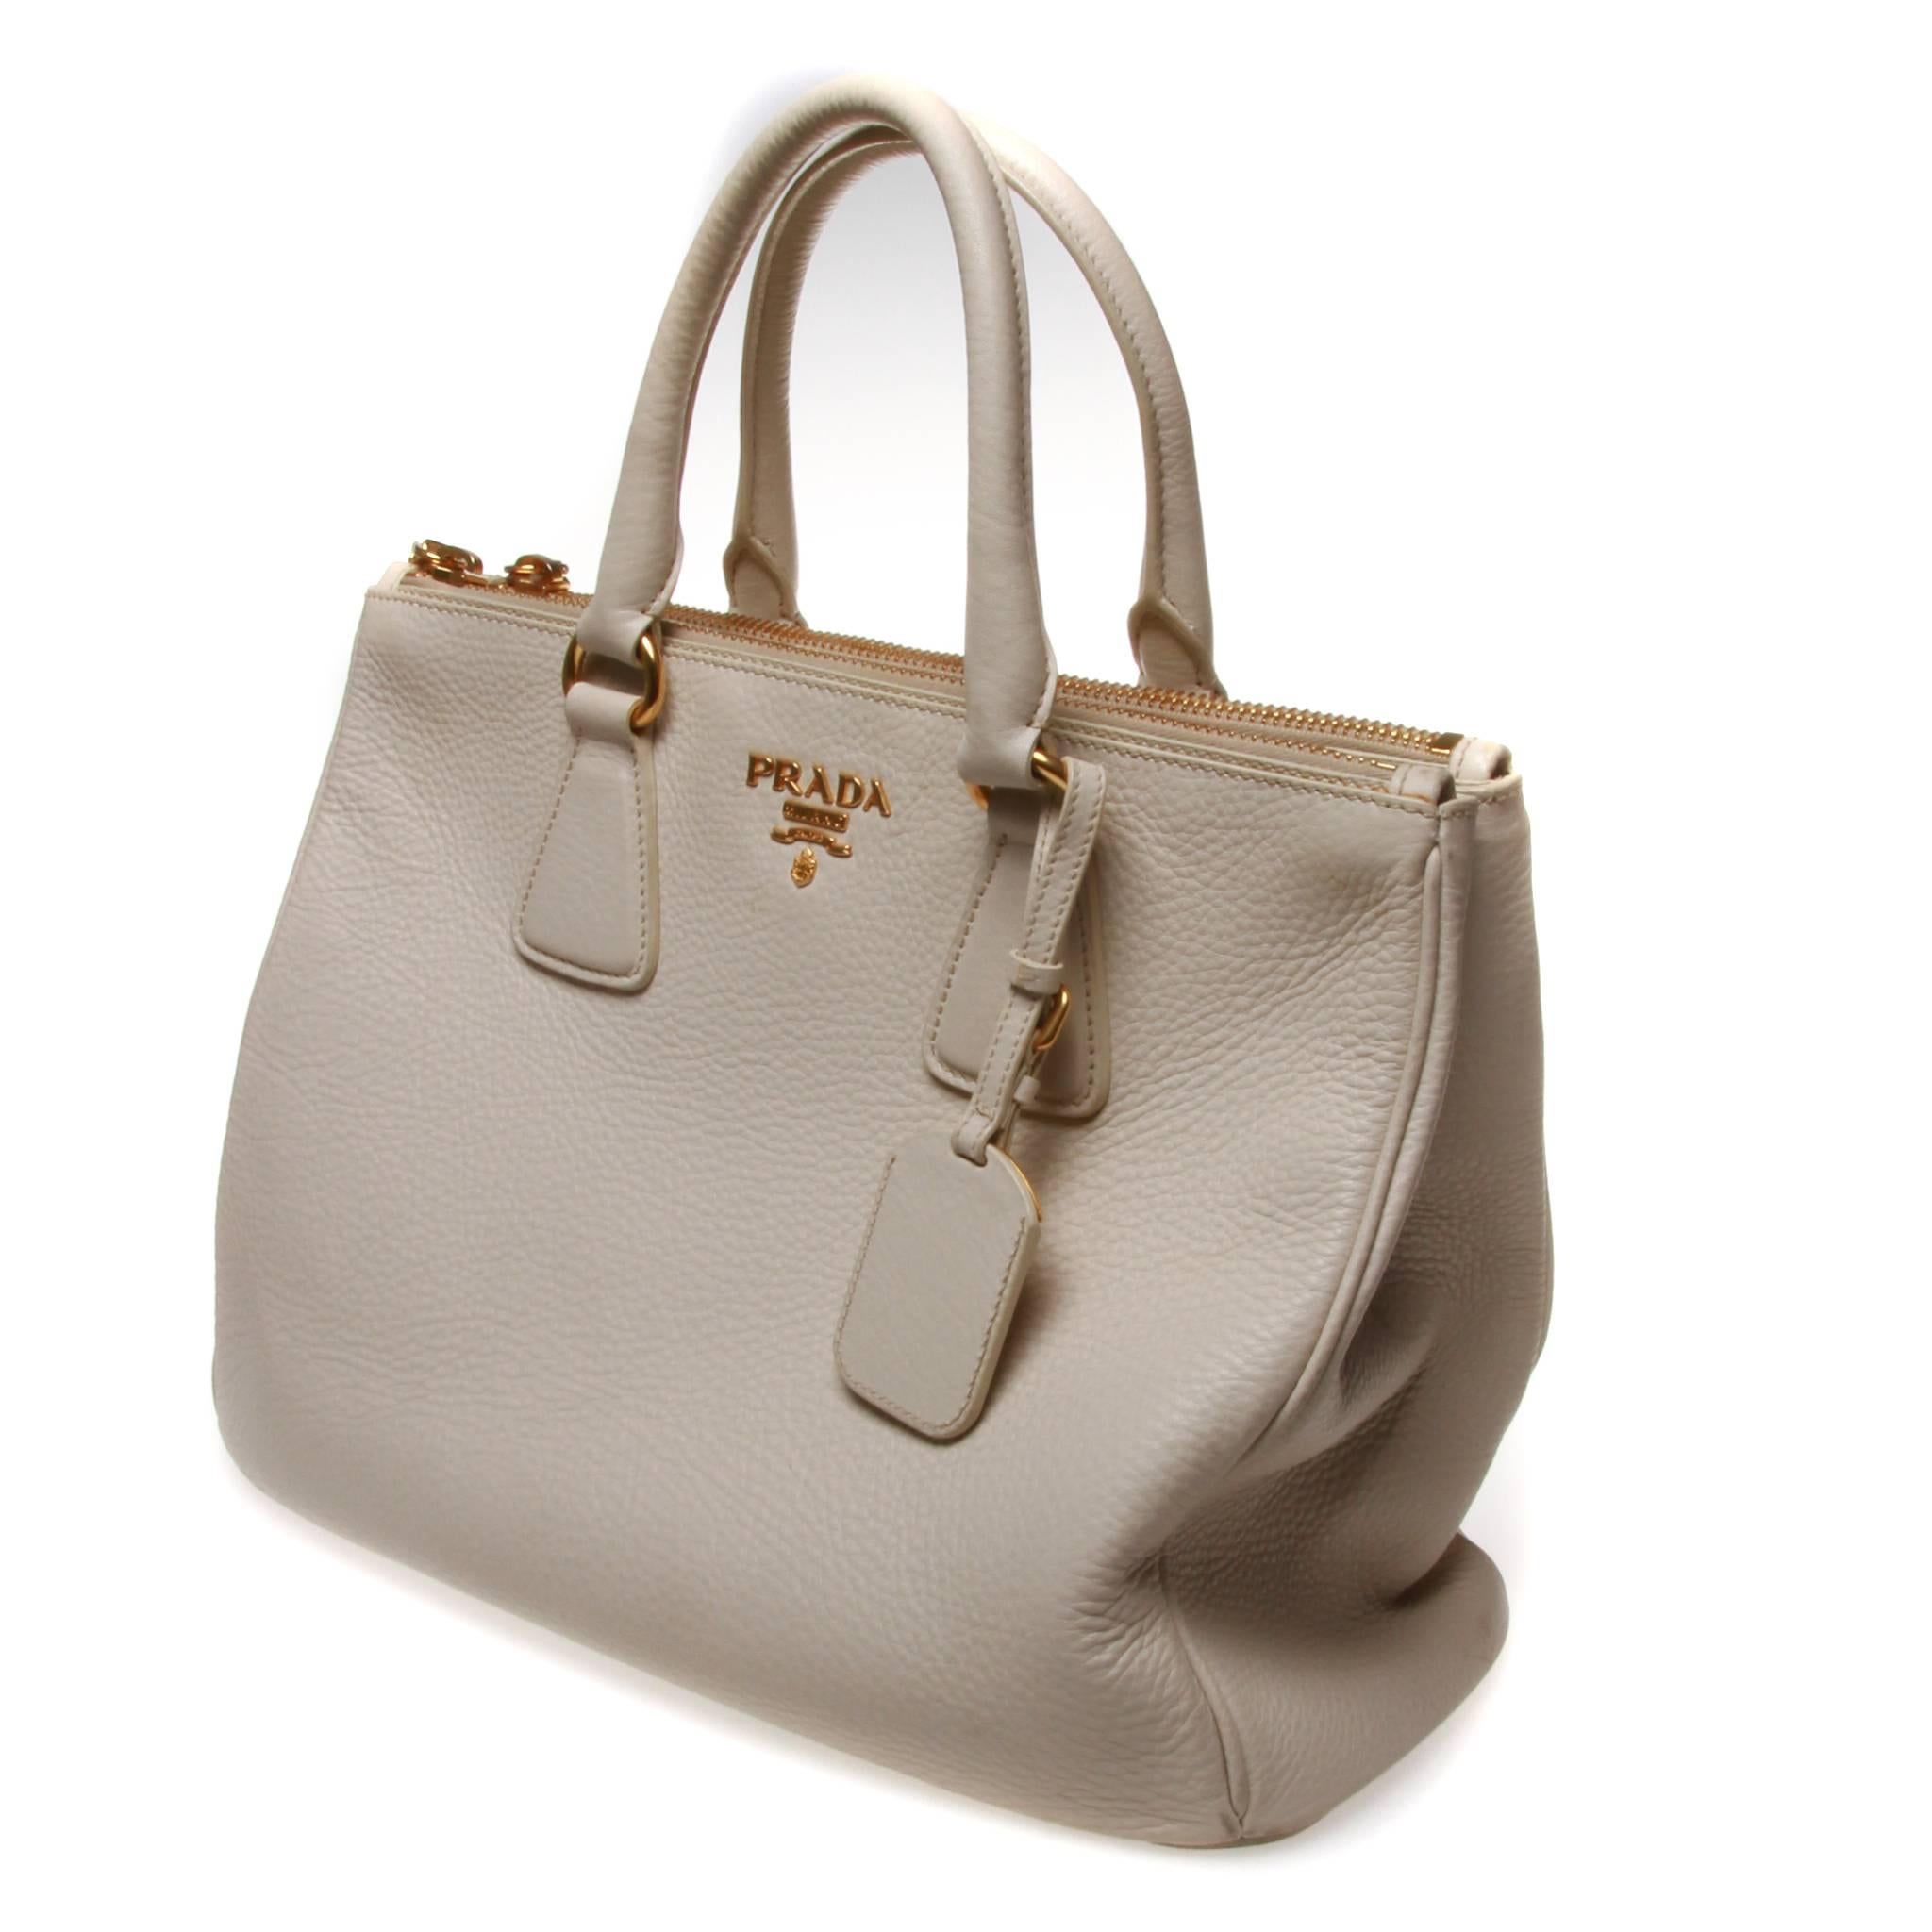 Cream grained leather Prada Double-Zip tote with gold-tone hardware, dual rolled top handles, logo placard at front, protective feet at base, cream logo jacquard lining, three interior compartments; two with zip closures, four pockets at interior